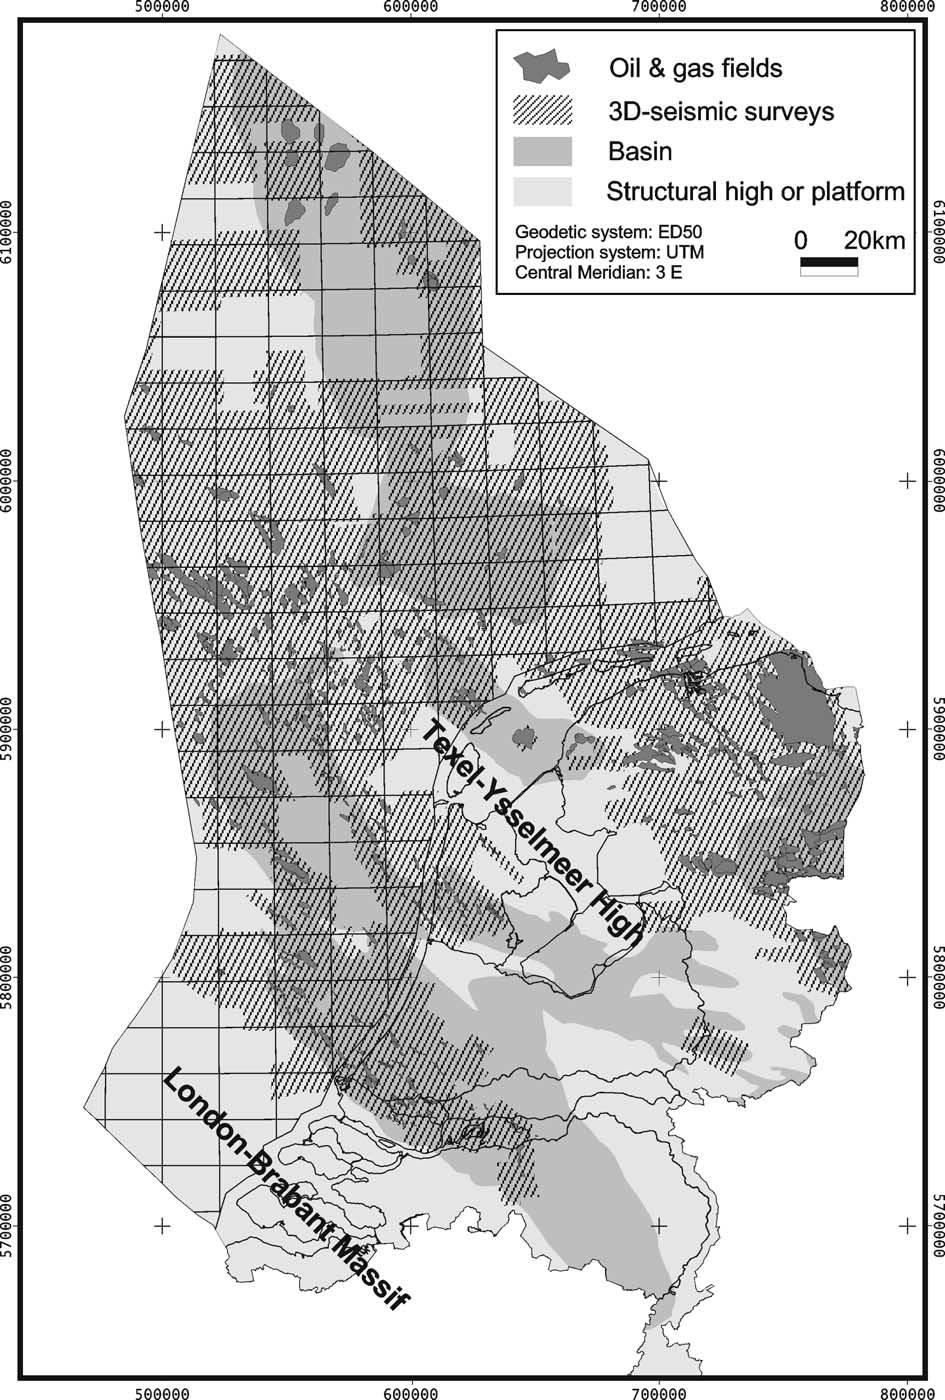 THE NETHERLANDS NATURAL GAS EXPLORATION 71 Fig. 2. Structural elements and 3D seismic coverage in the Netherlands. these values cannot be considered representative for the future.